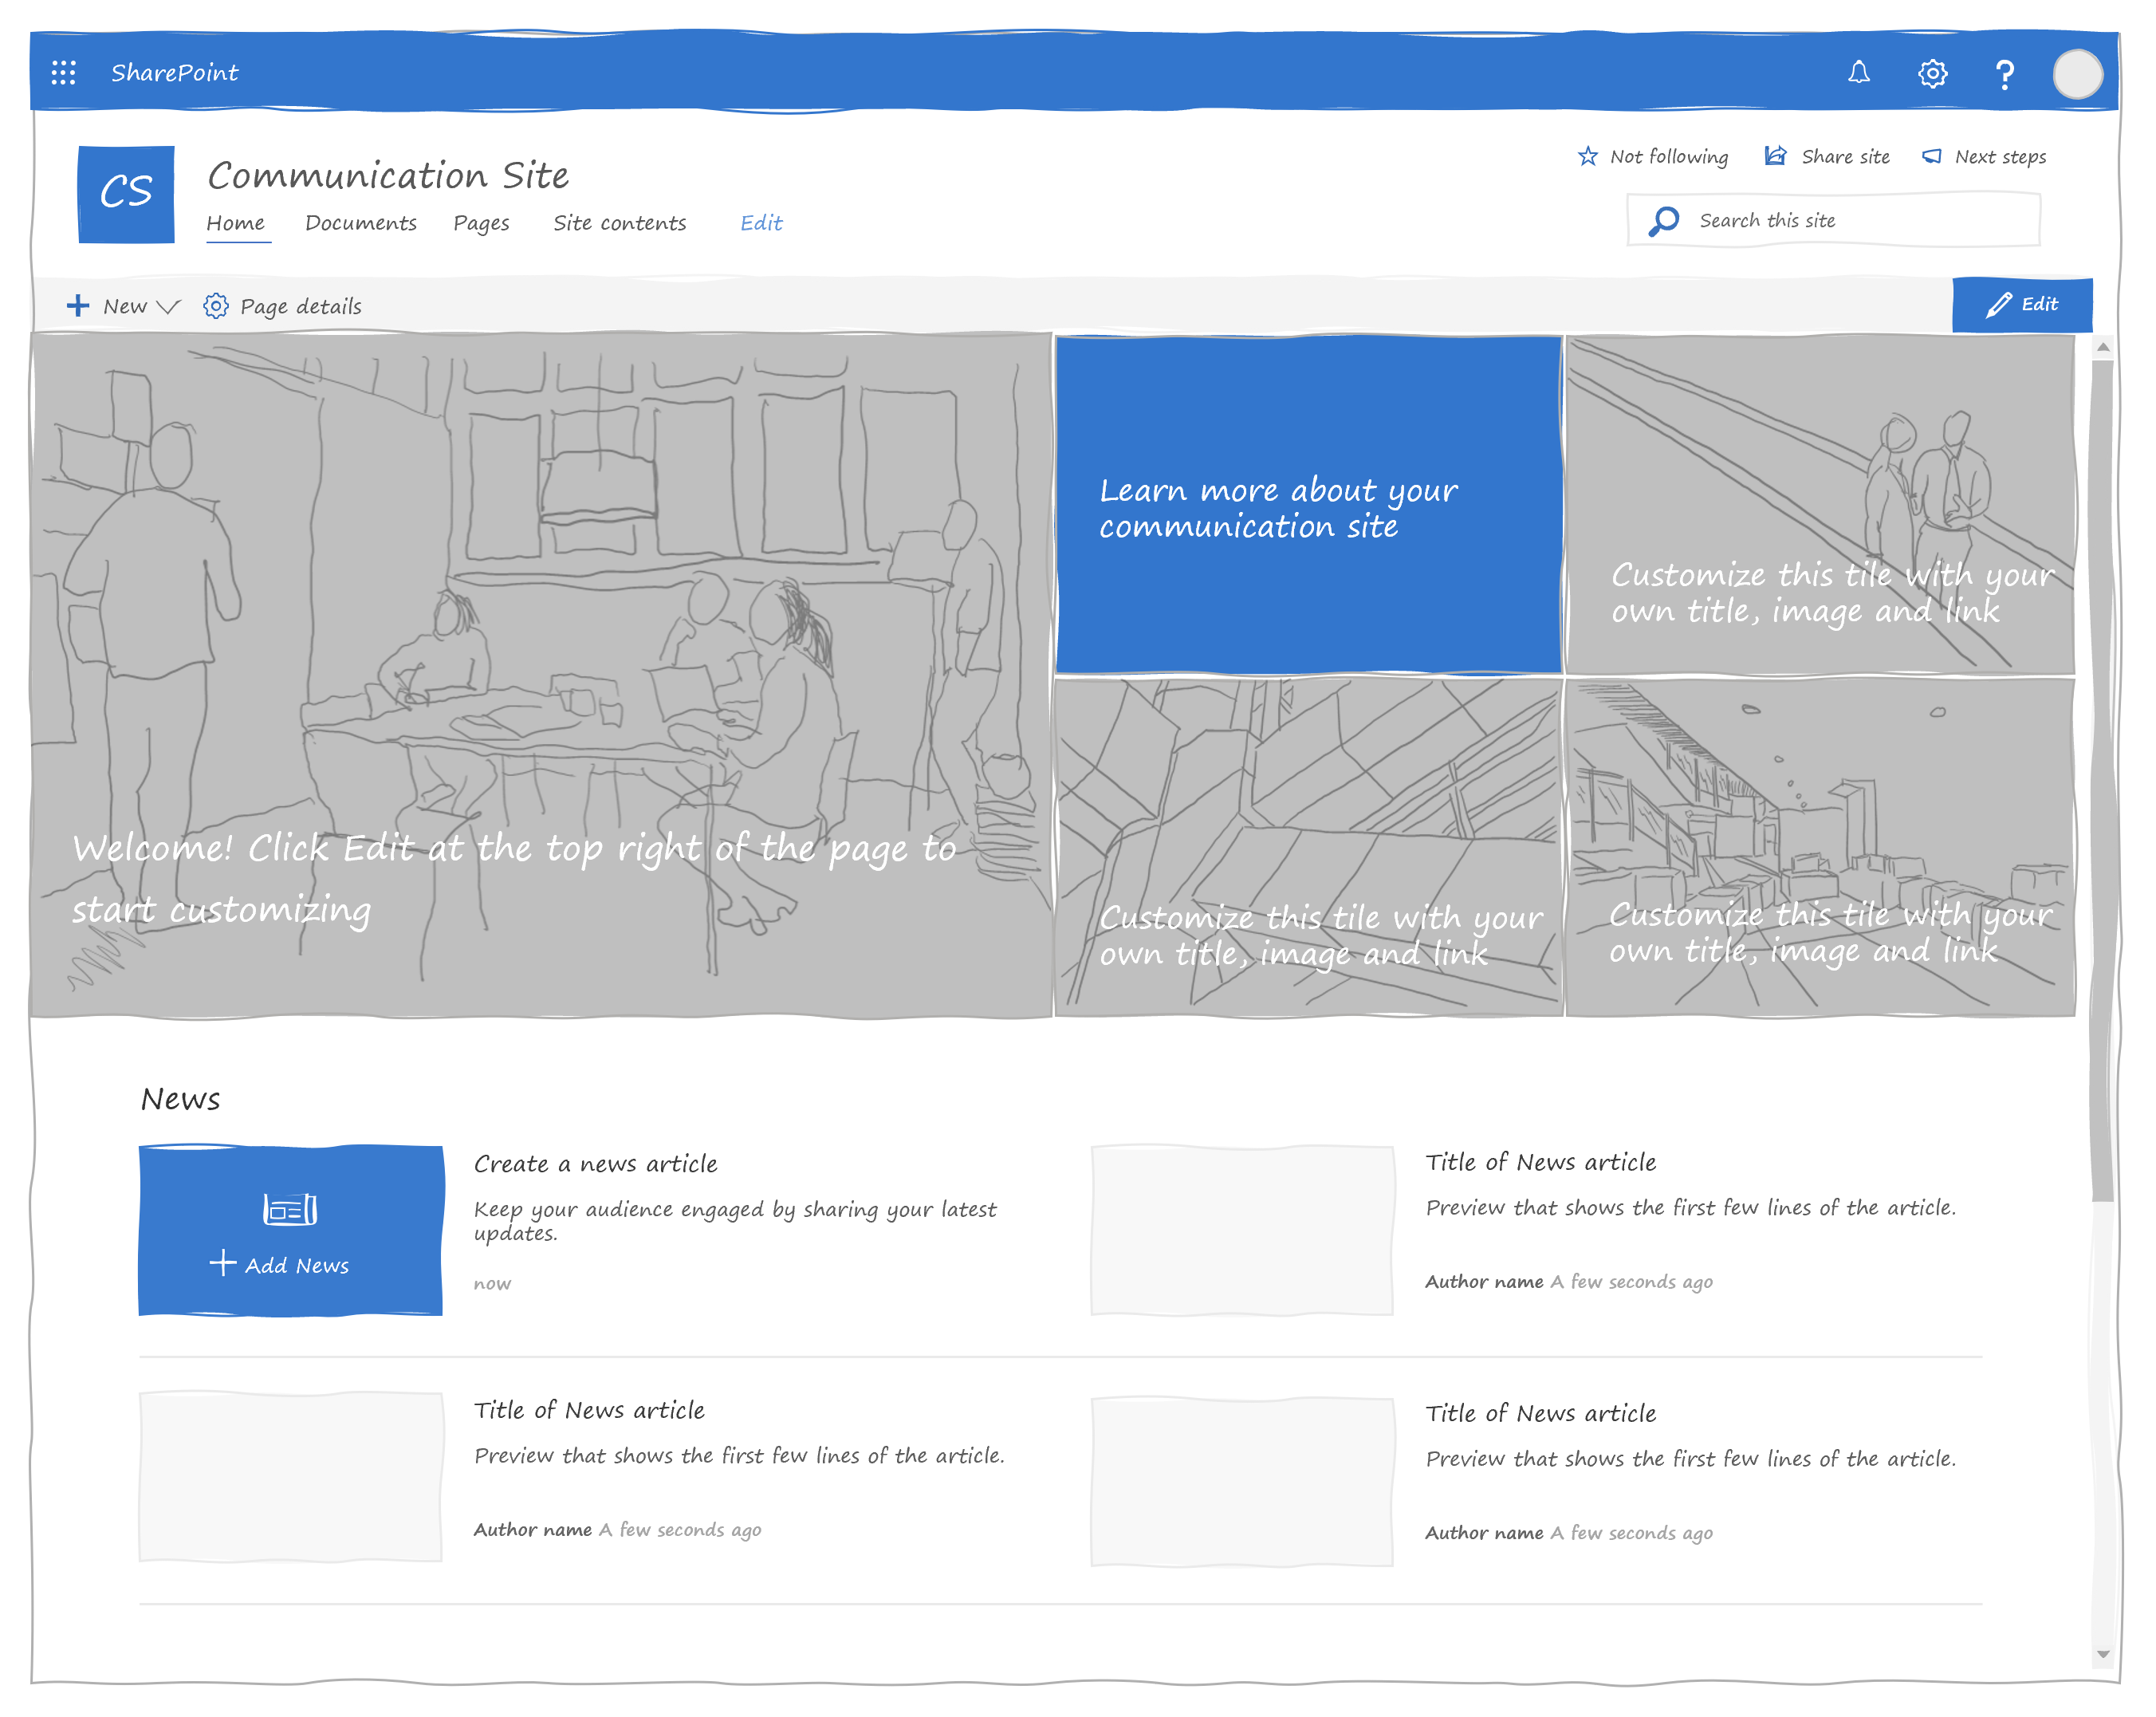 Would you like to create low-fidelity SharePoint wireframes in PowerPoint?